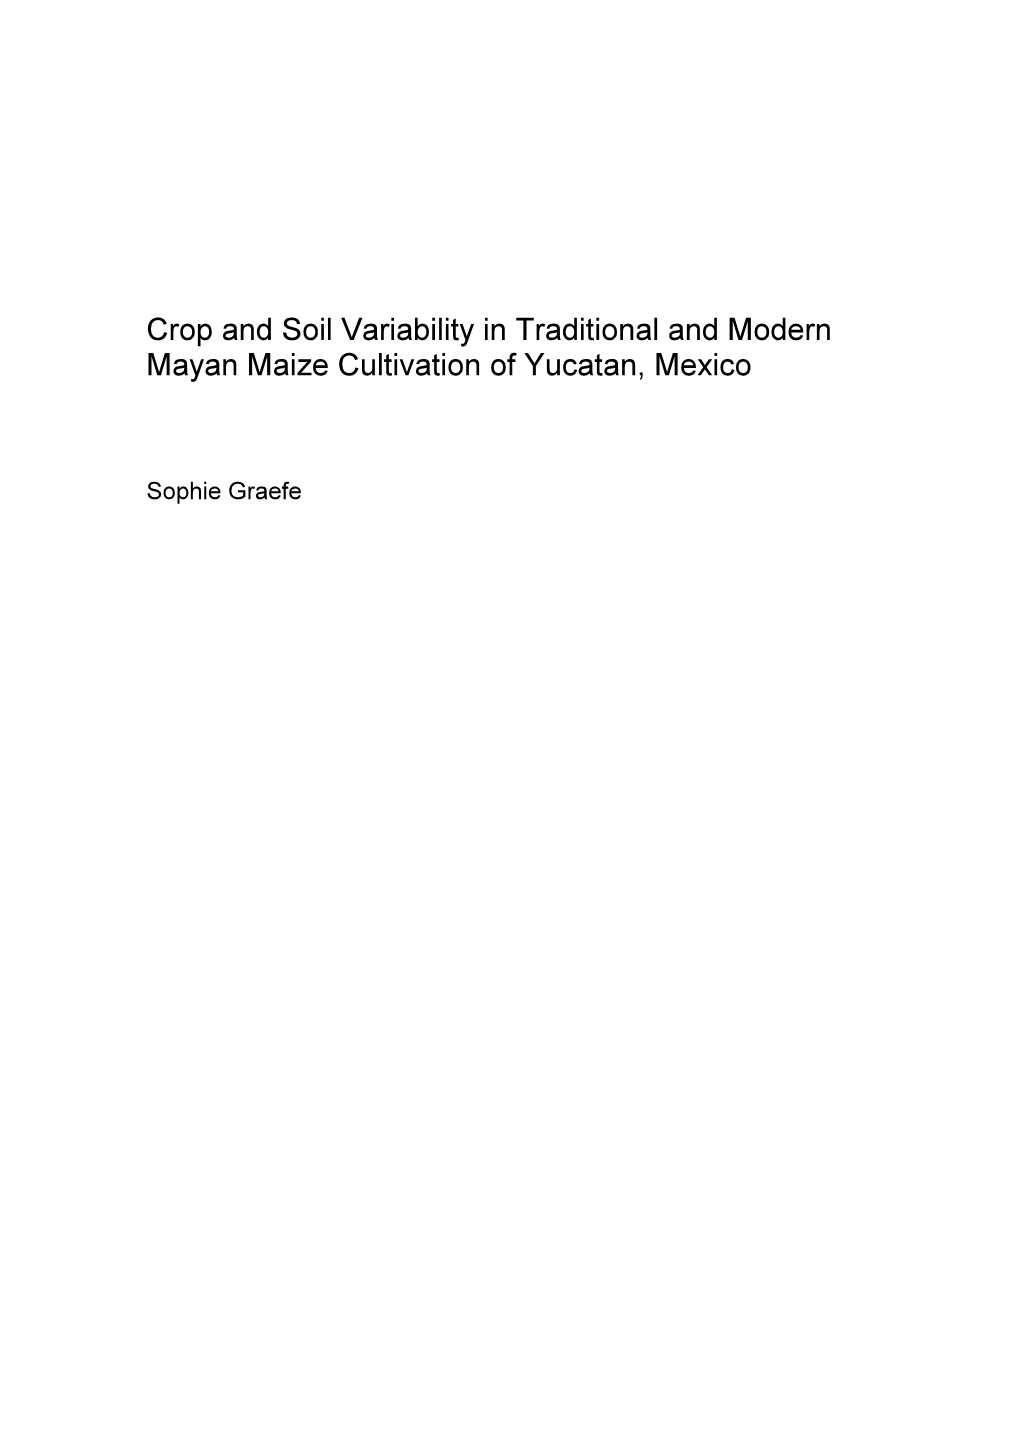 Crop and Soil Variability in Traditional and Modern Mayan Maize Cultivation of Yucatan, Mexico